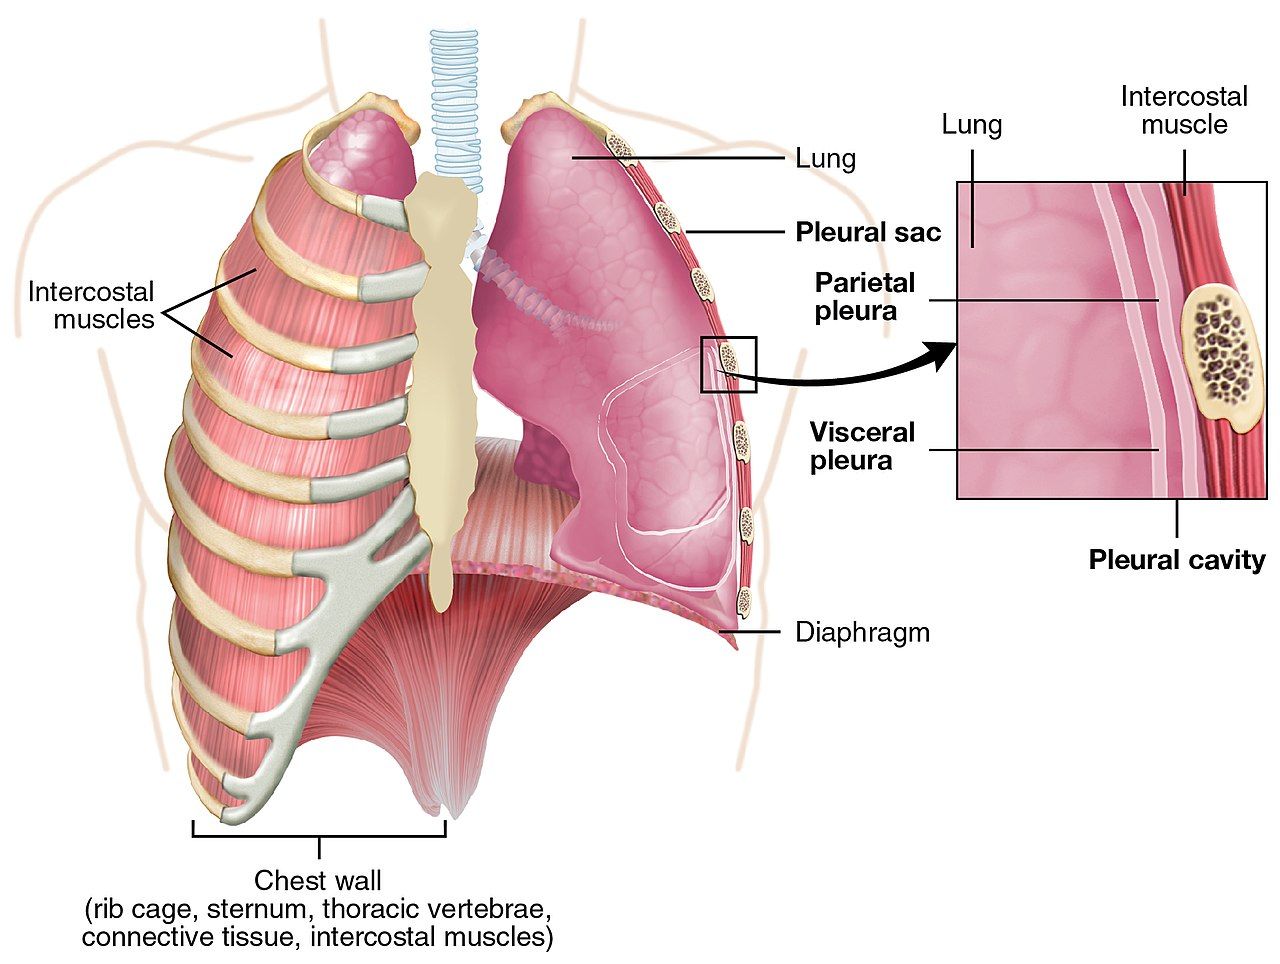 By OpenStax College - Anatomy & Physiology, Connexions Web site. http://cnx.org/content/col11496/1.6/, Jun 19, 2013., CC BY 3.0, https://commons.wikimedia.org/w/index.php?curid=30148380